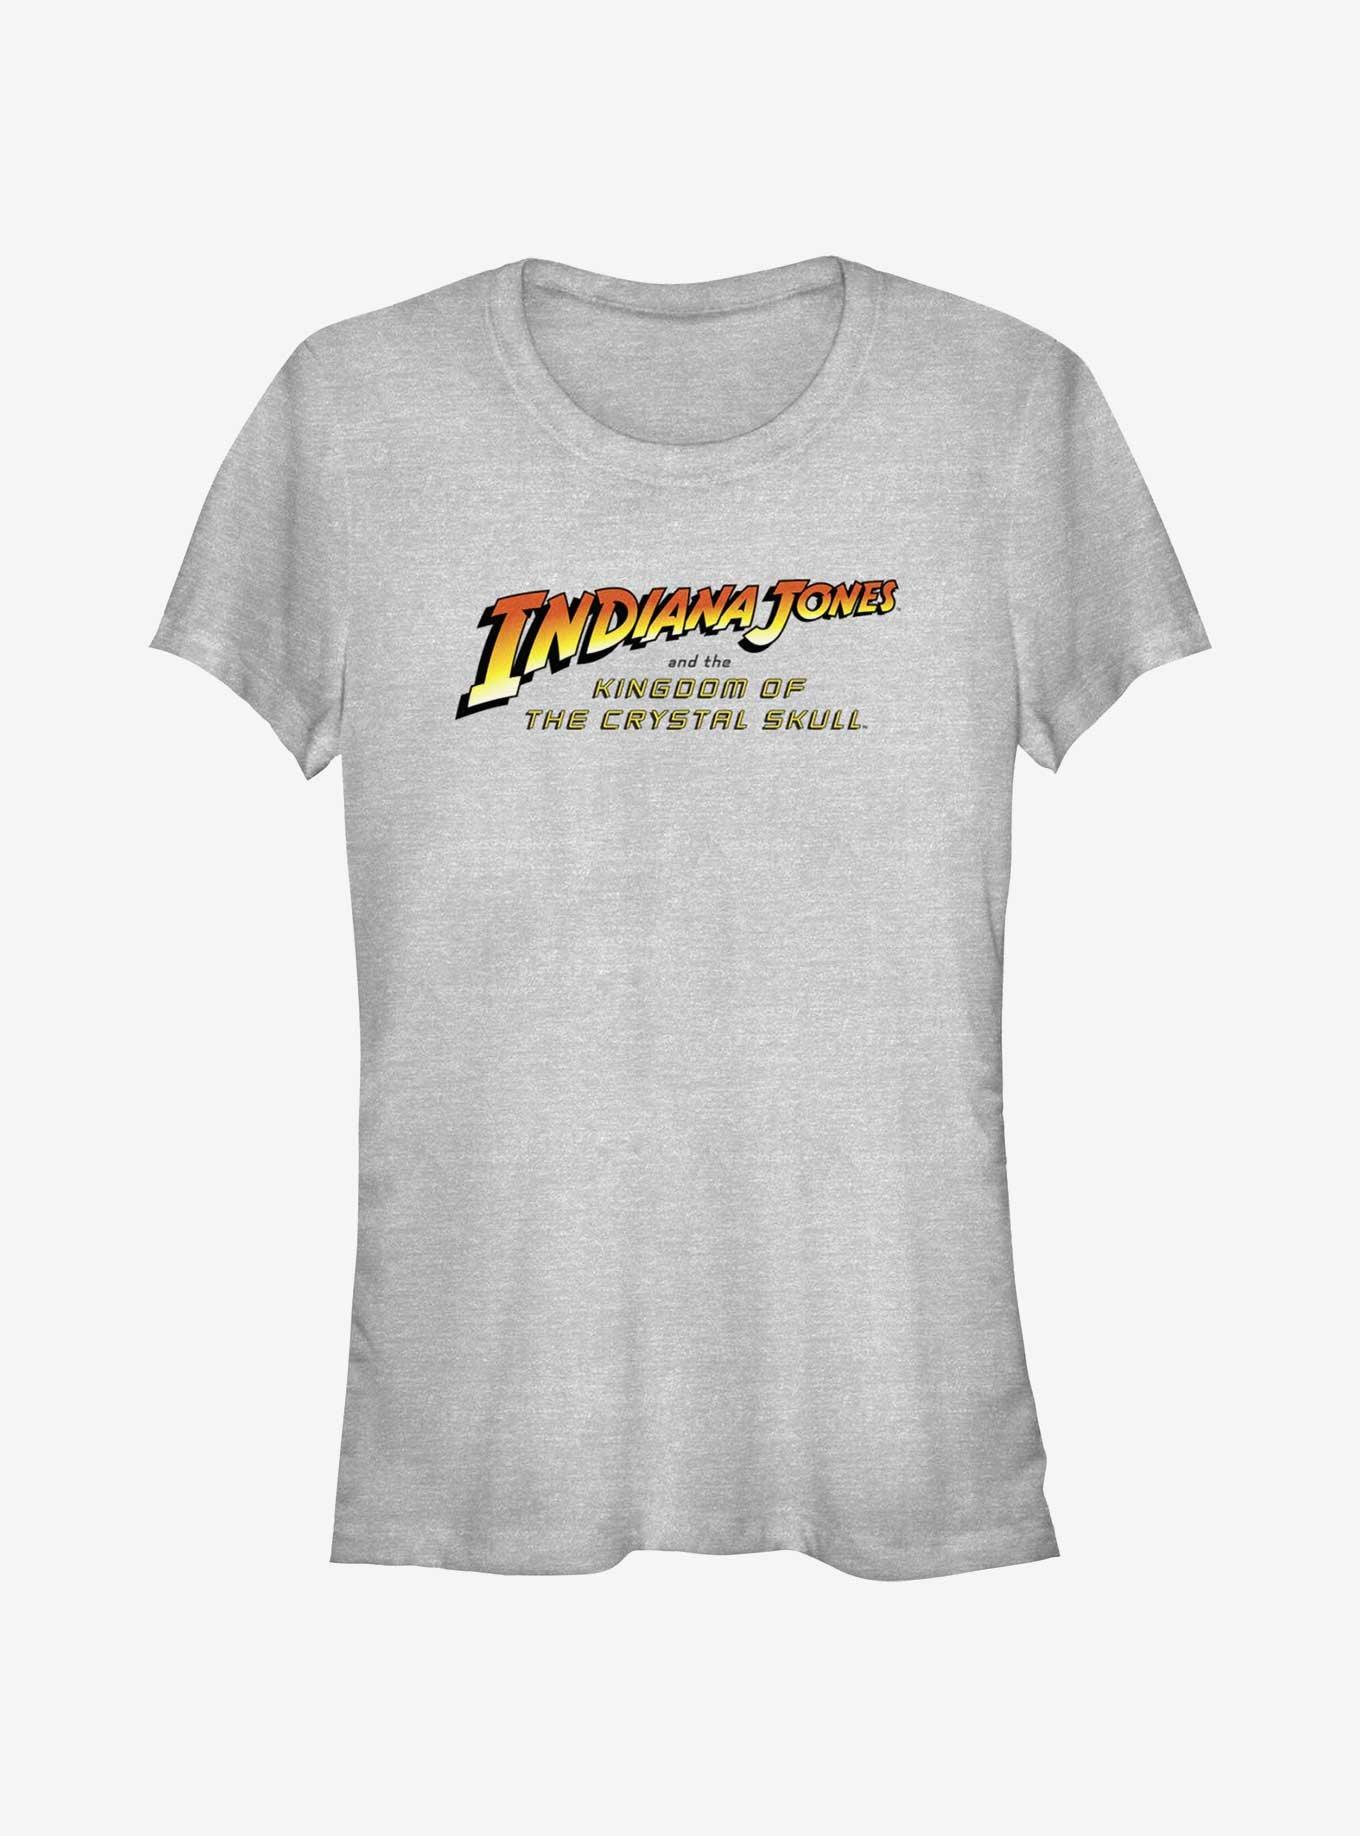 Indiana Jones and the Kingdom of the Crystal Skull Logo Girls T-Shirt, ATH HTR, hi-res